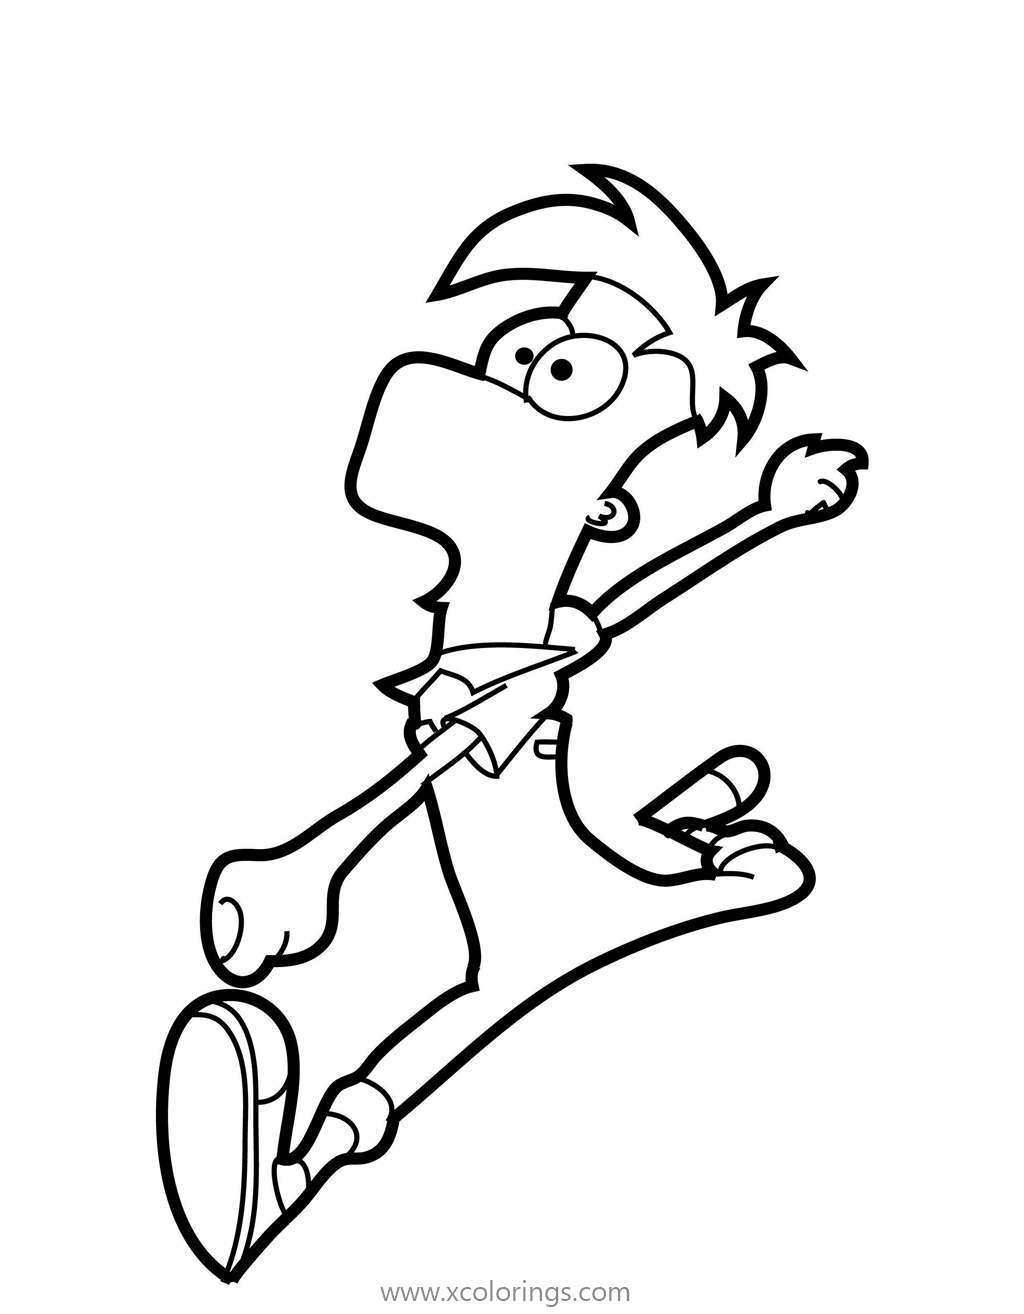 Free Phineas and Ferb Coloring Pages Ferb is Jumping printable